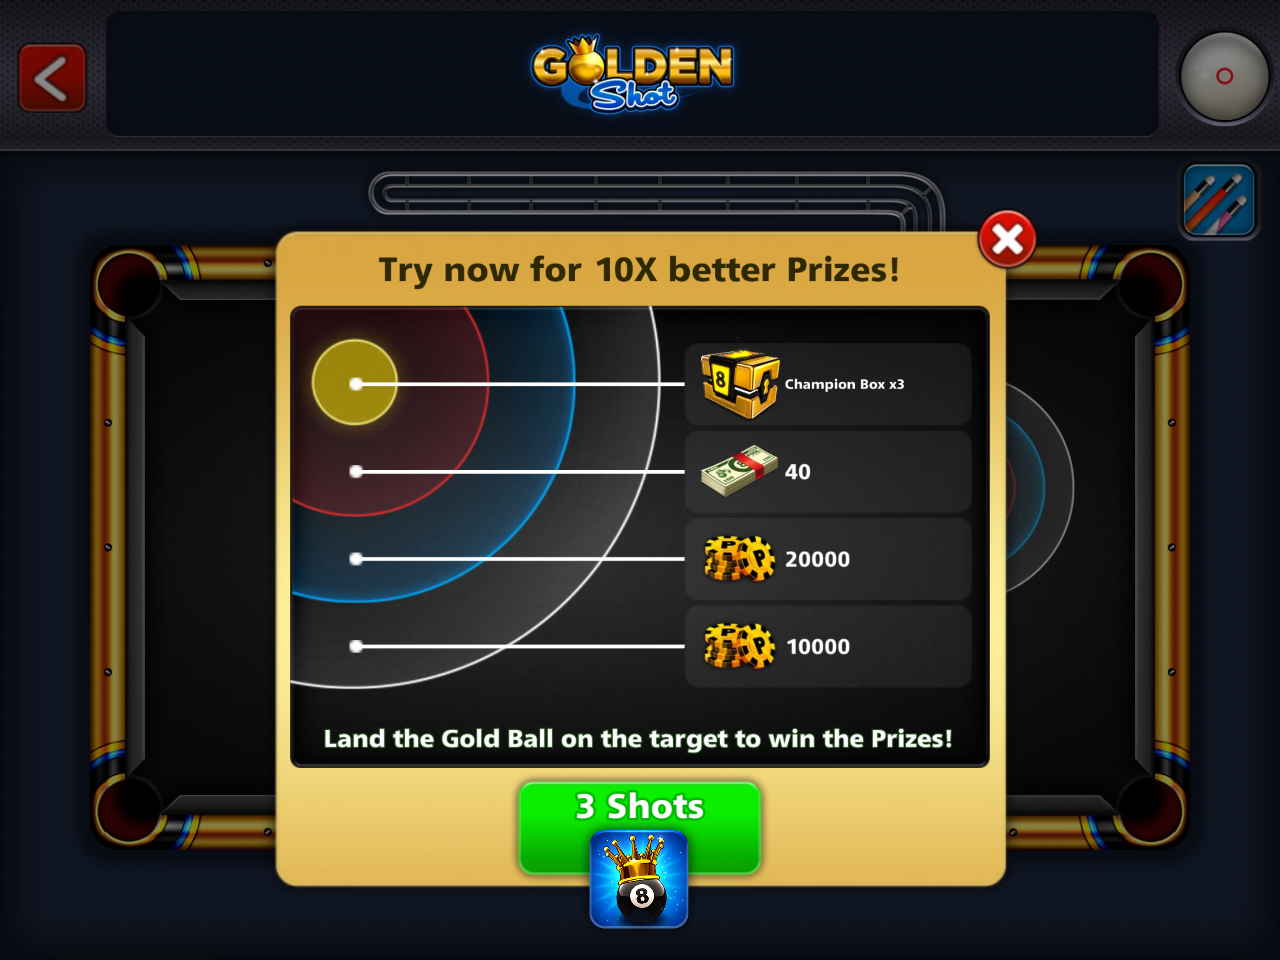 Miniclip's 8 Ball Pool: A melting pot of skill & chance based  gratification-Part 2